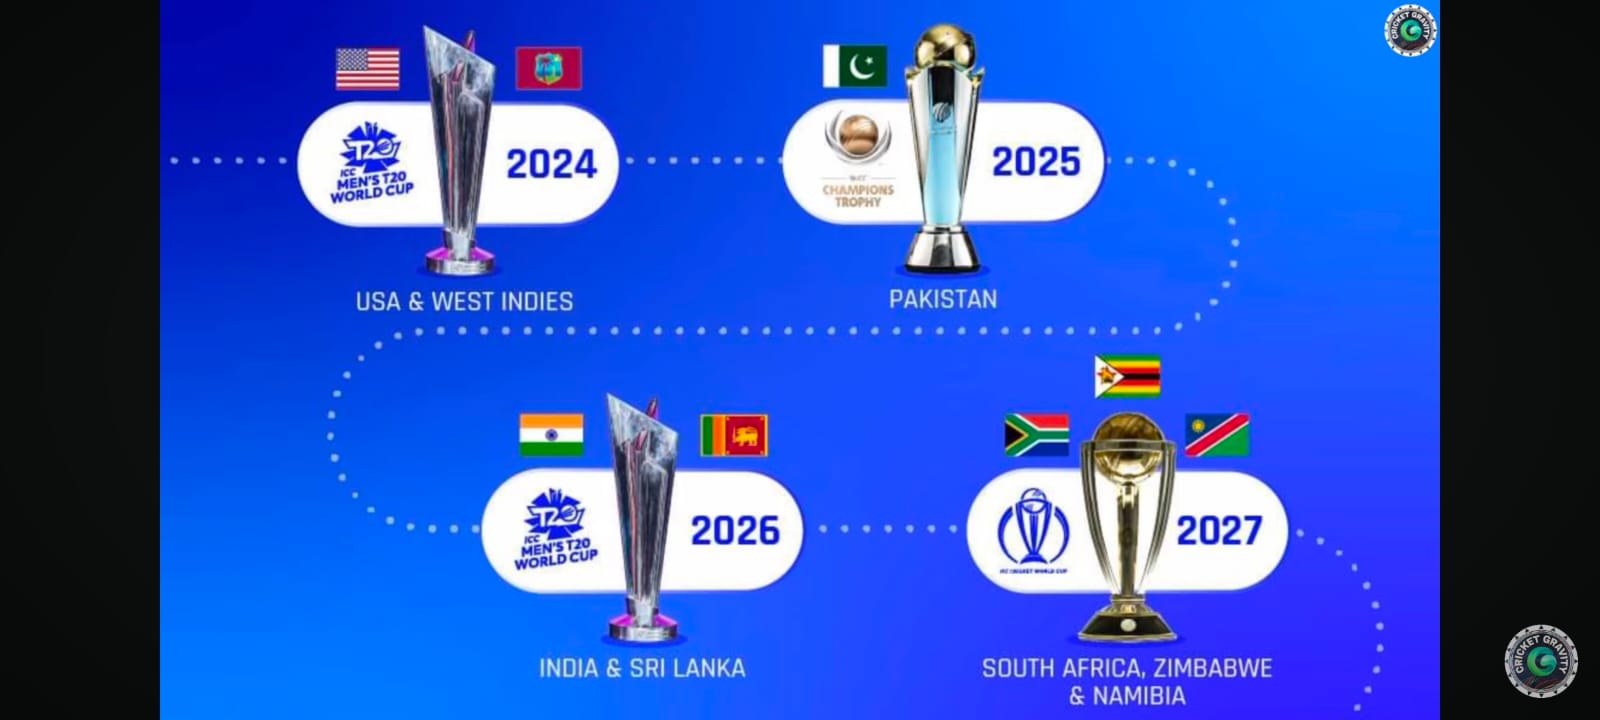 in which year international cricket council was founded?